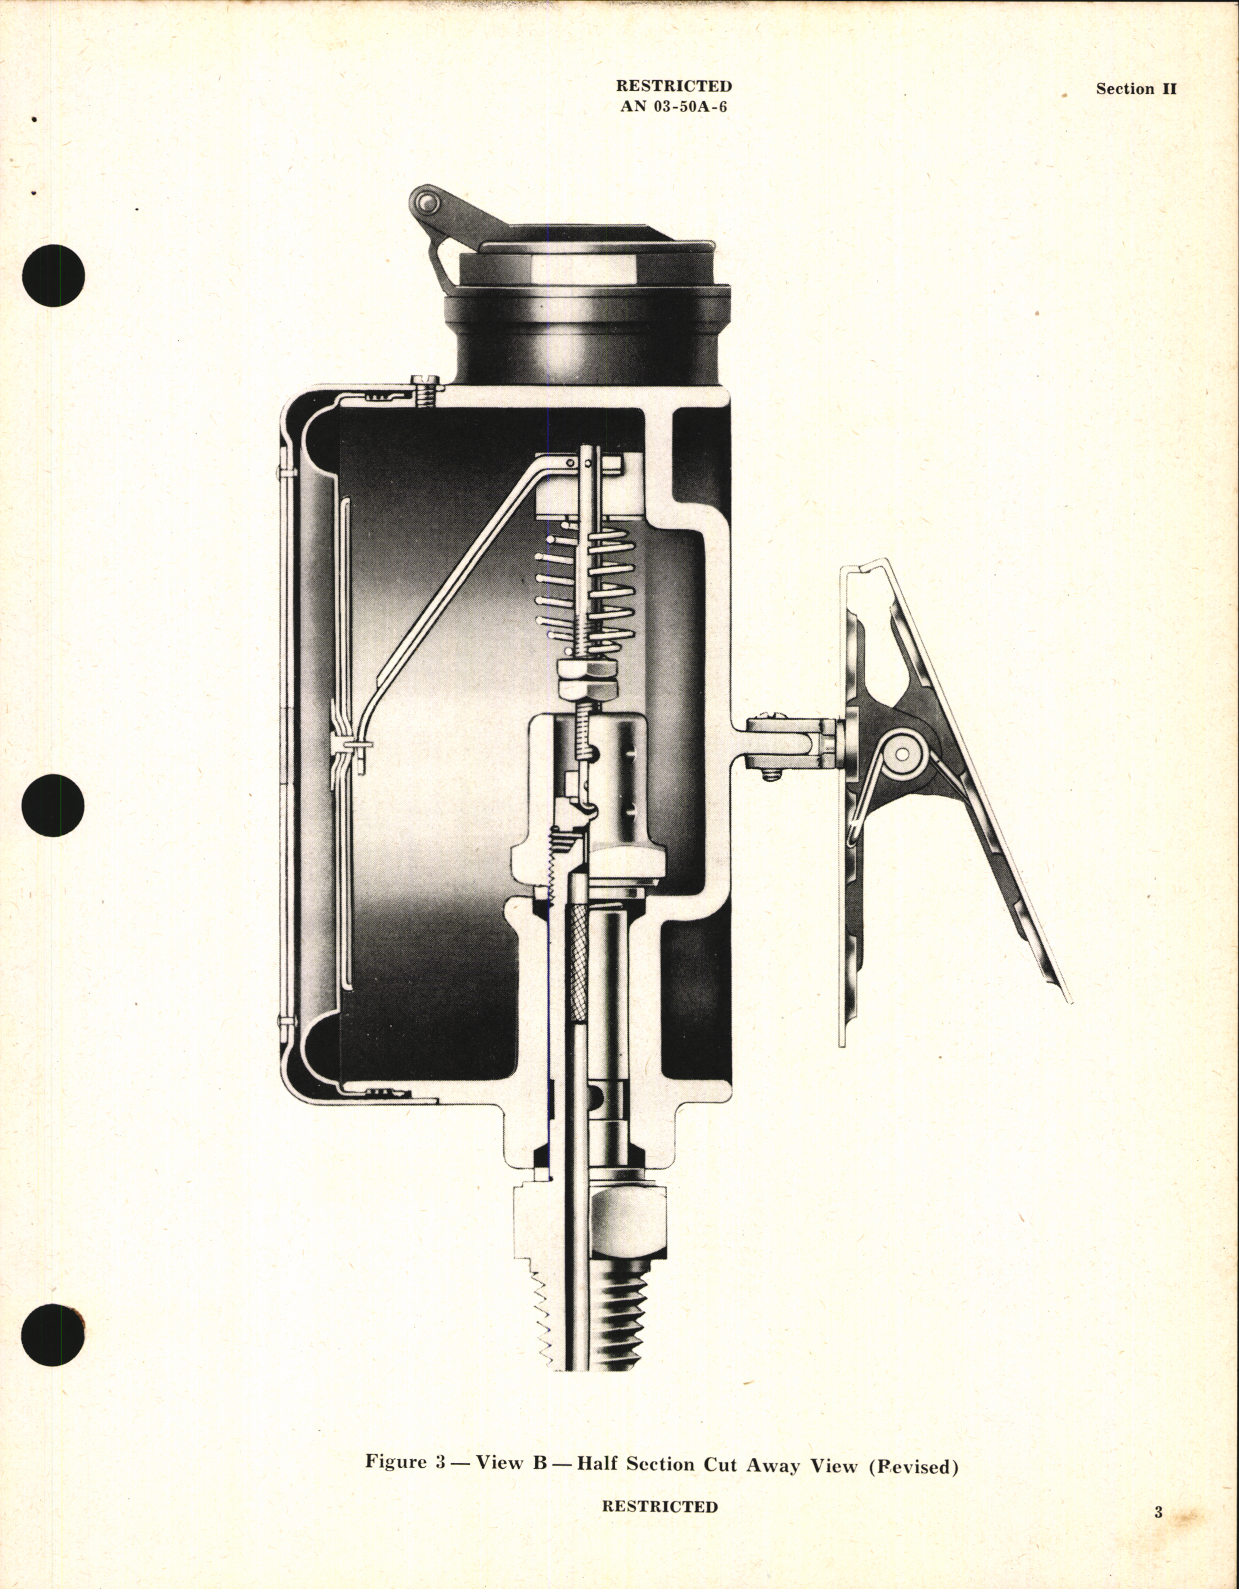 Sample page 7 from AirCorps Library document: Handbook of Instructions with Parts Catalog for Type A-13 Portable Oxygen Demand Regulator